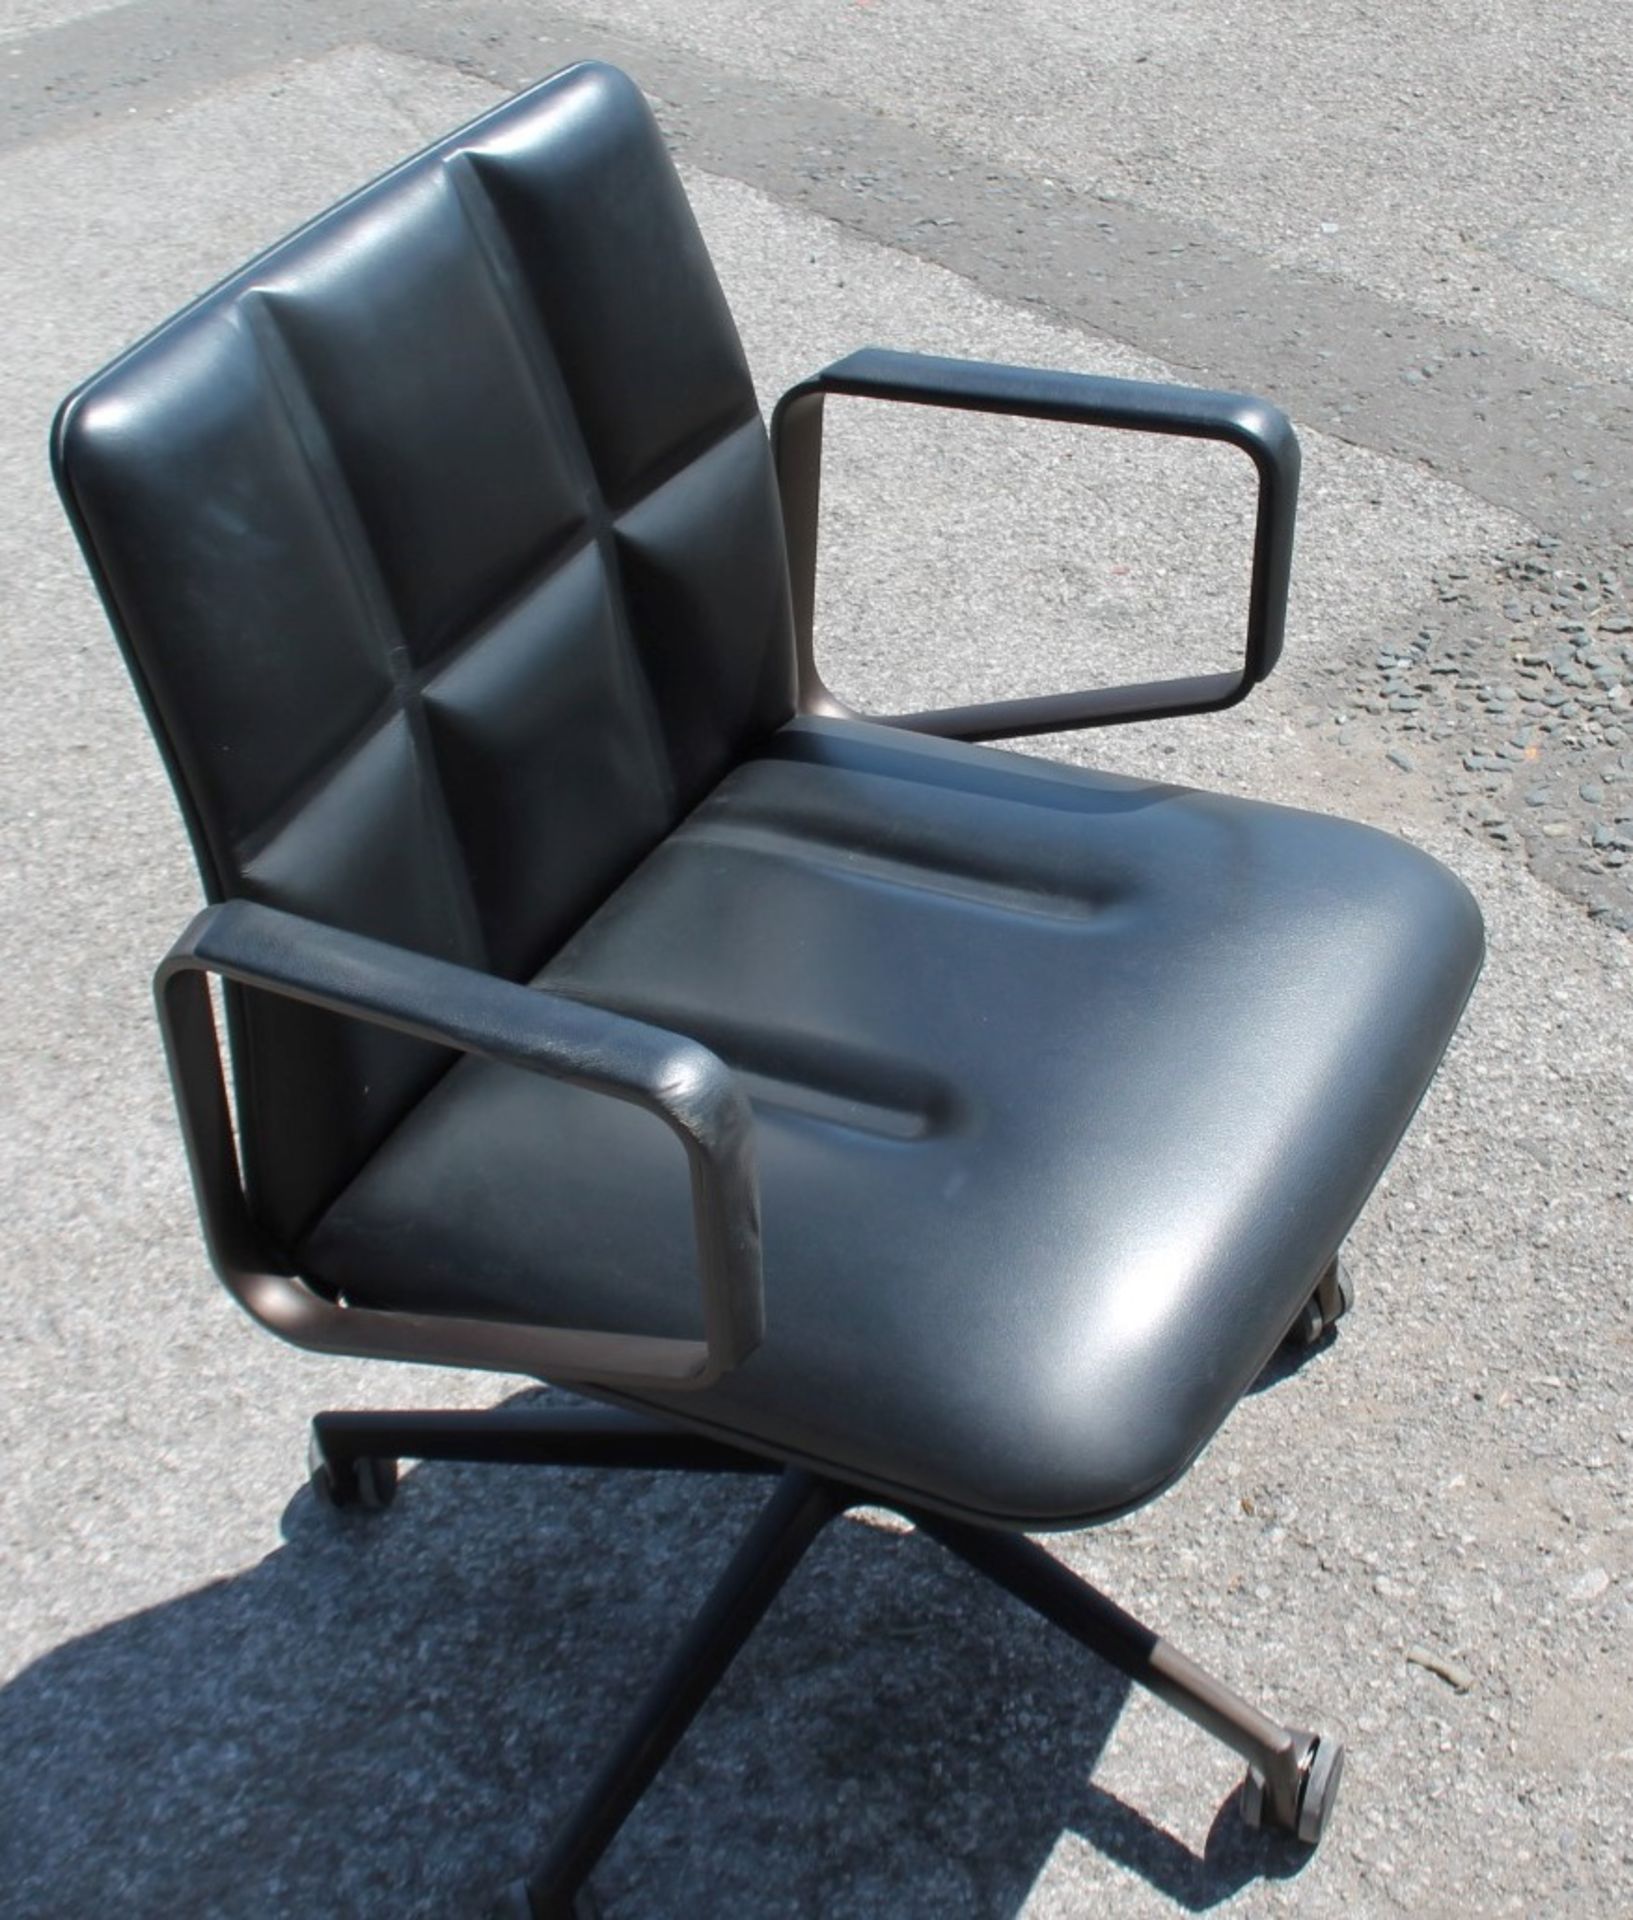 1 x WALTER KNOLL 'Leadchair' Executive Meeting Chair In Genuine Leather - Original RRP £4,250 - Image 6 of 9